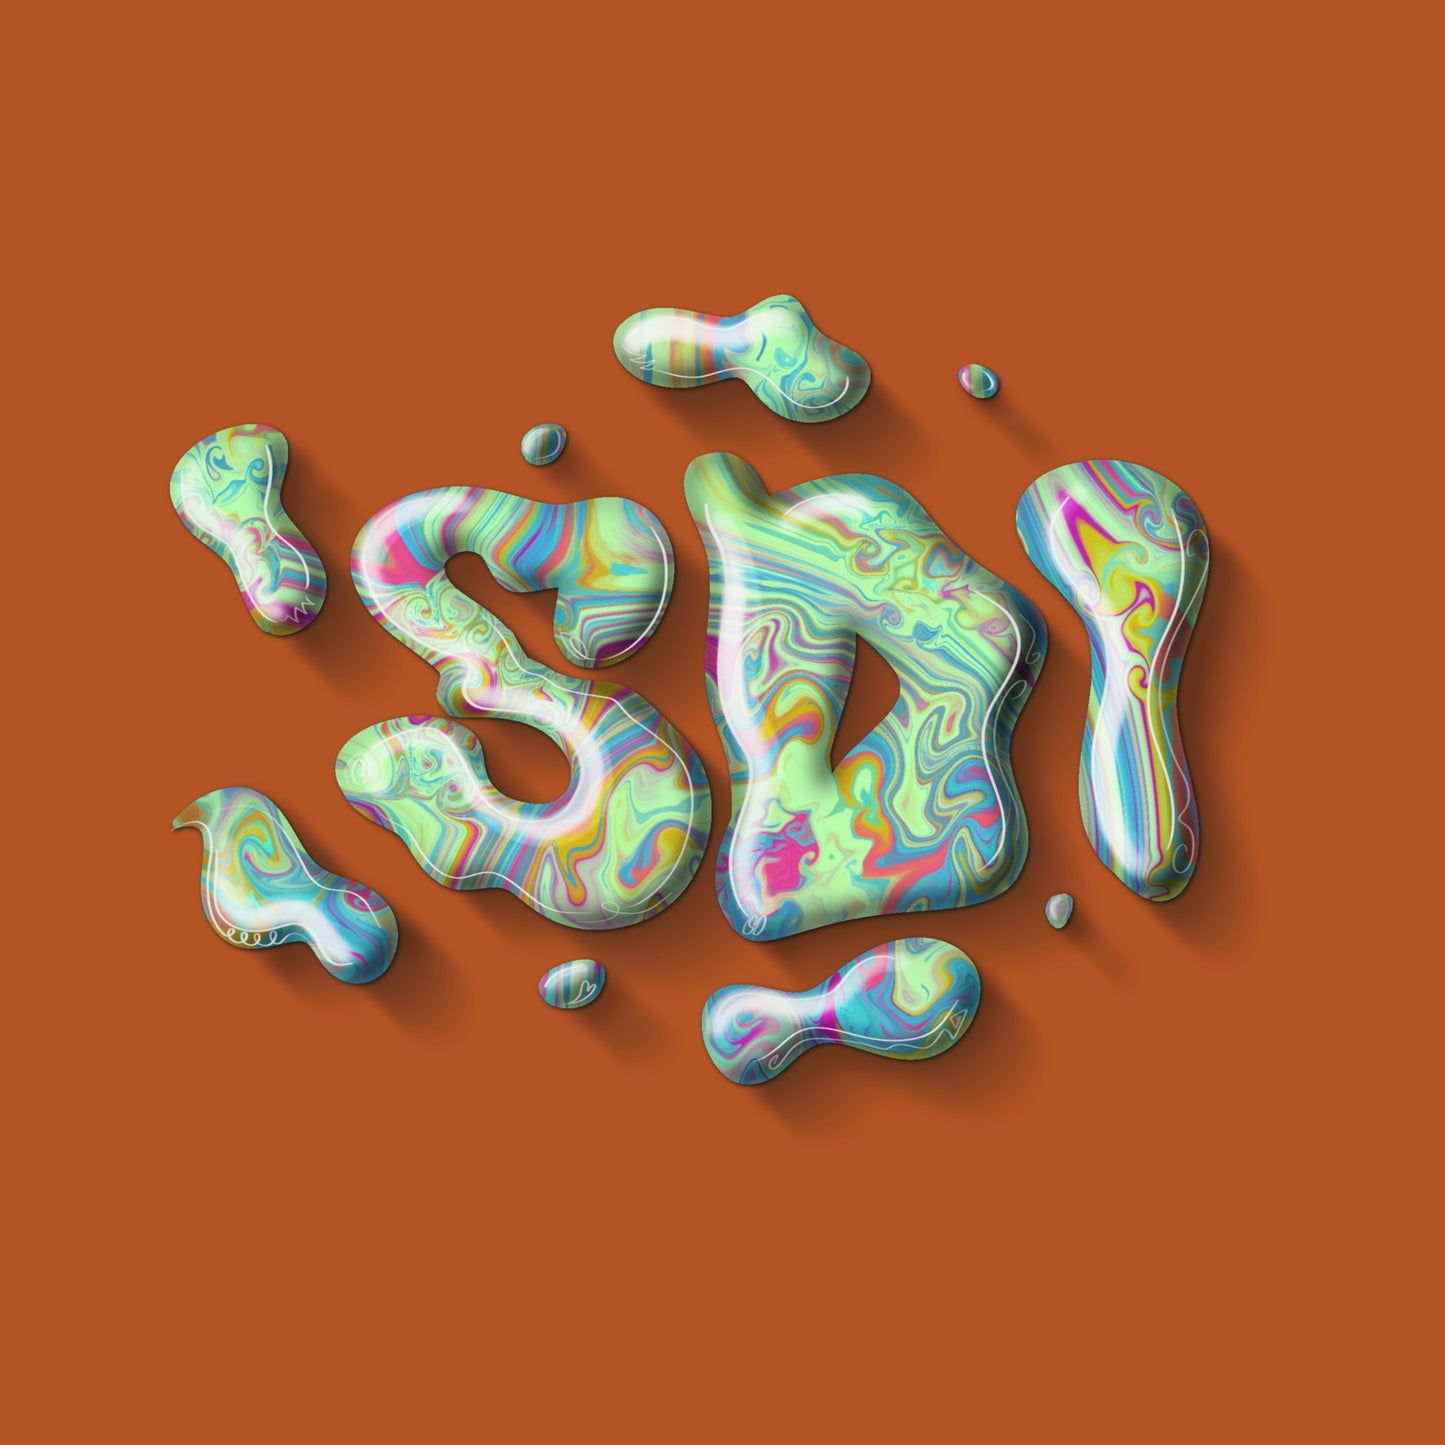 "SD Paint spill" hoodie (PRE-ORDER)